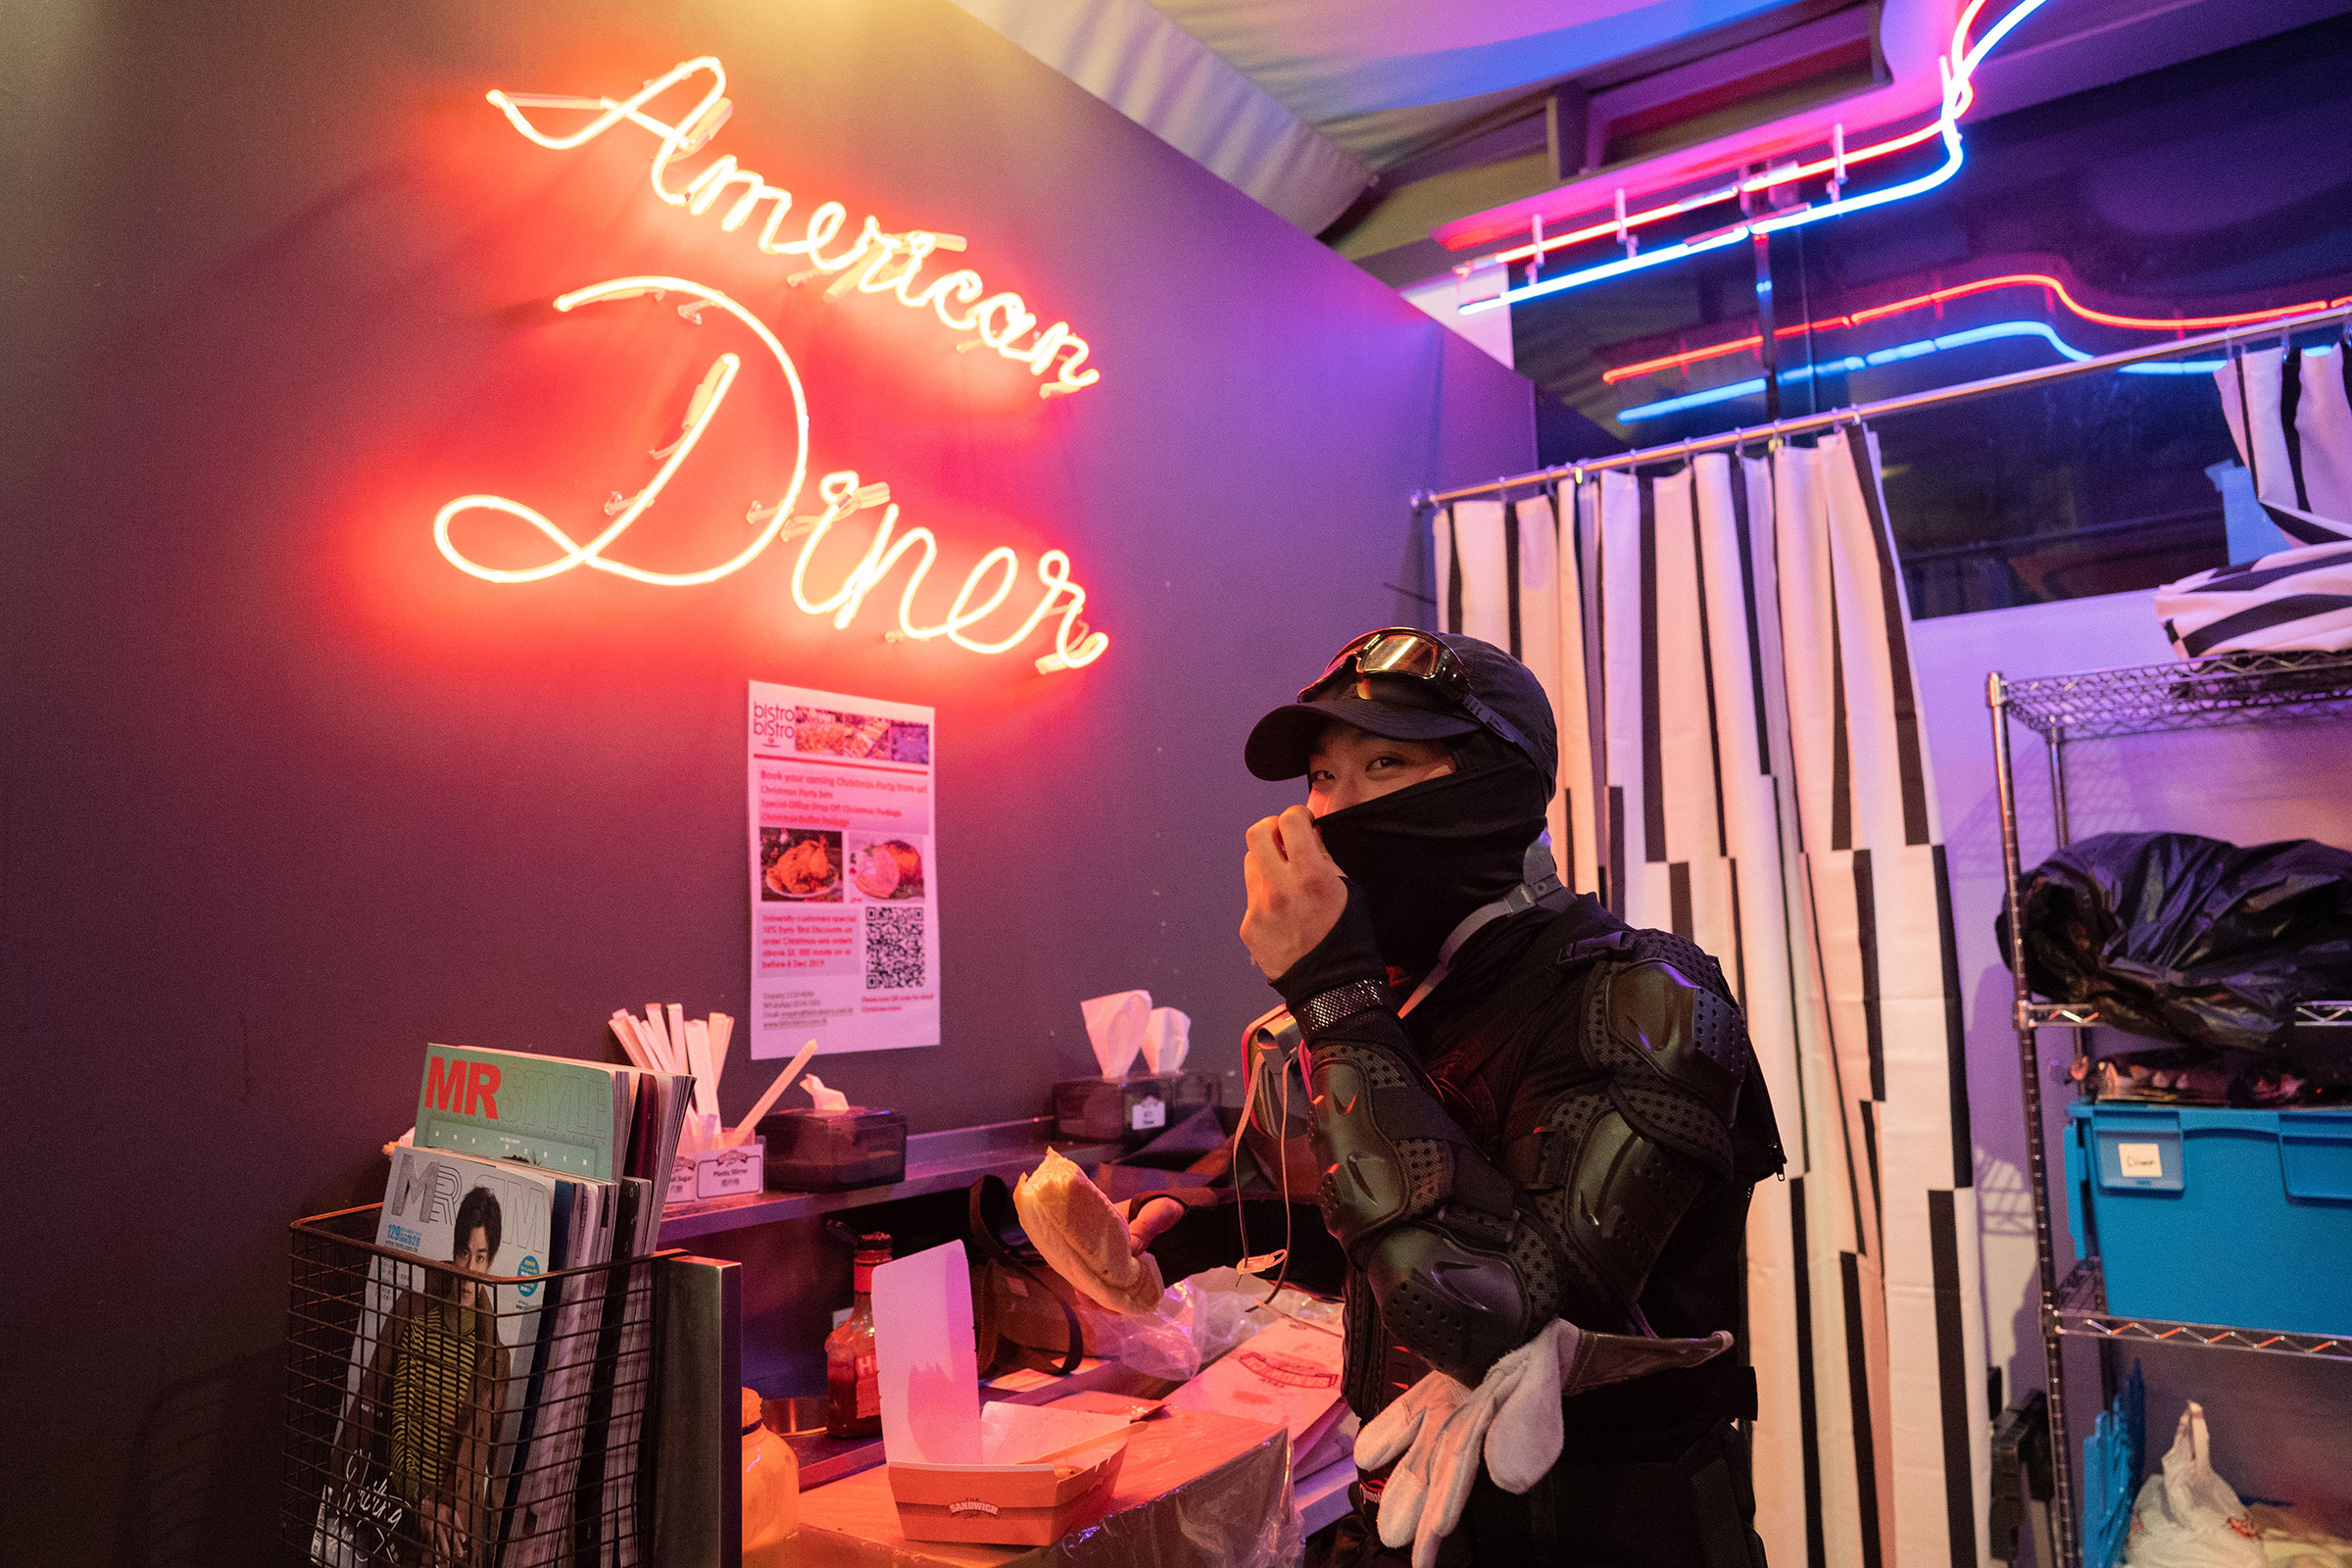 A frontline protestor eats a late-night hot dog at the "American Diner" on the Polytechnic University campus, Nov. 15, 2019. (Bing Guan)